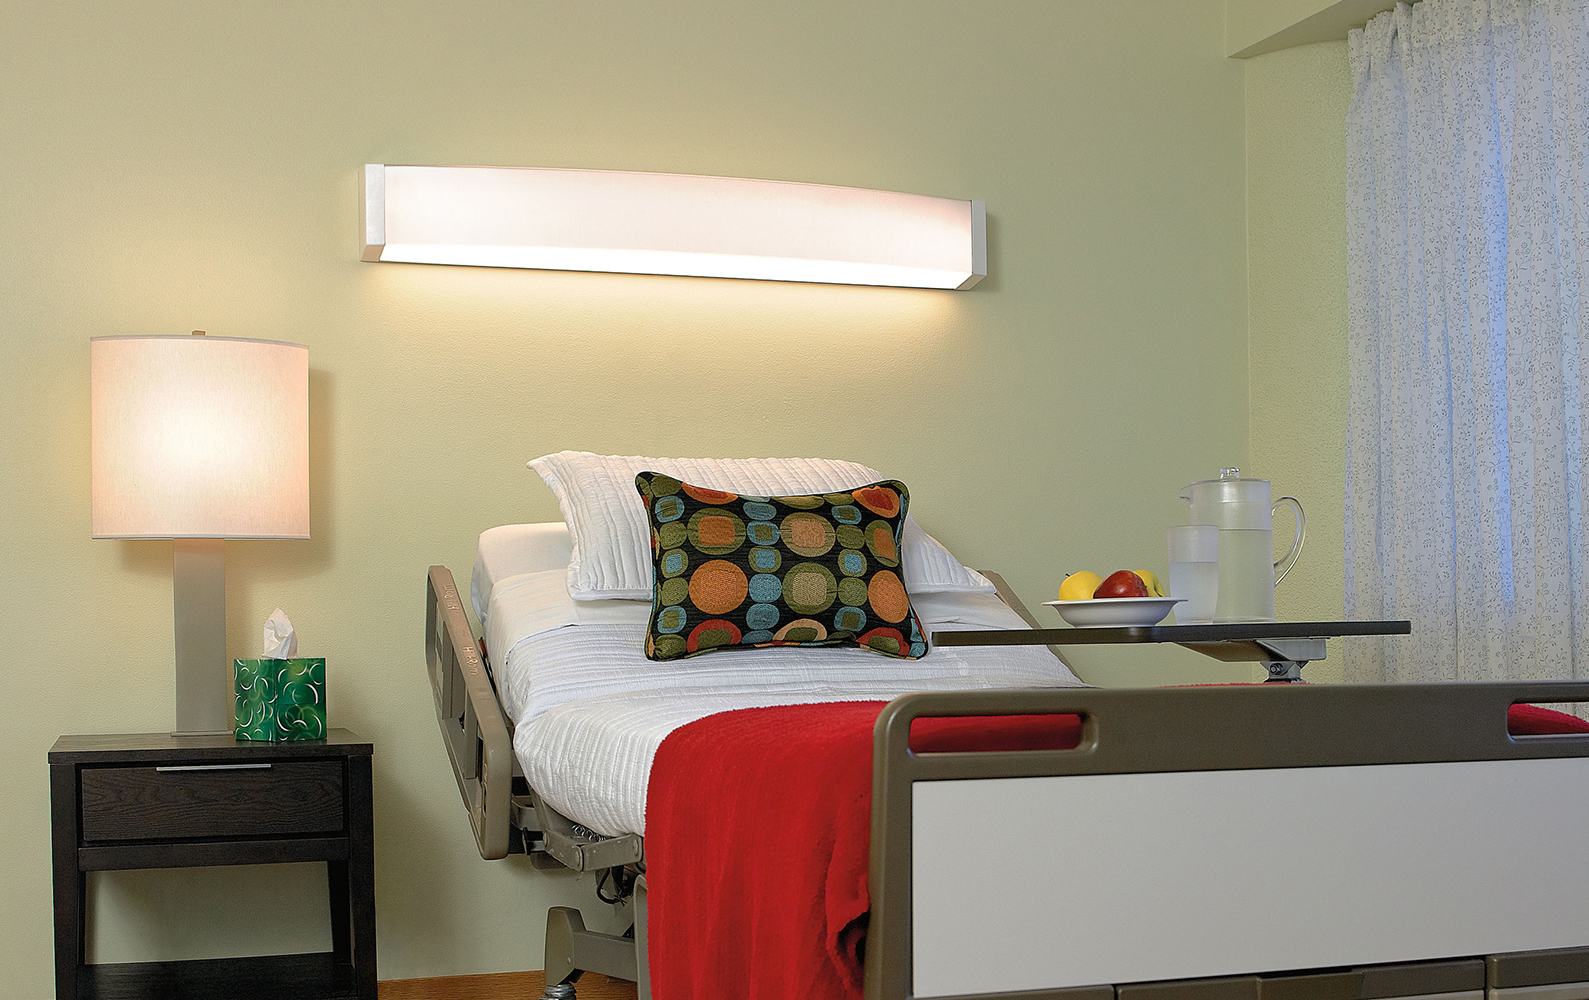 Unity medical lighting fixtures in headwall and table lamp versions, over a patient bed with a side table and colorful pillow.